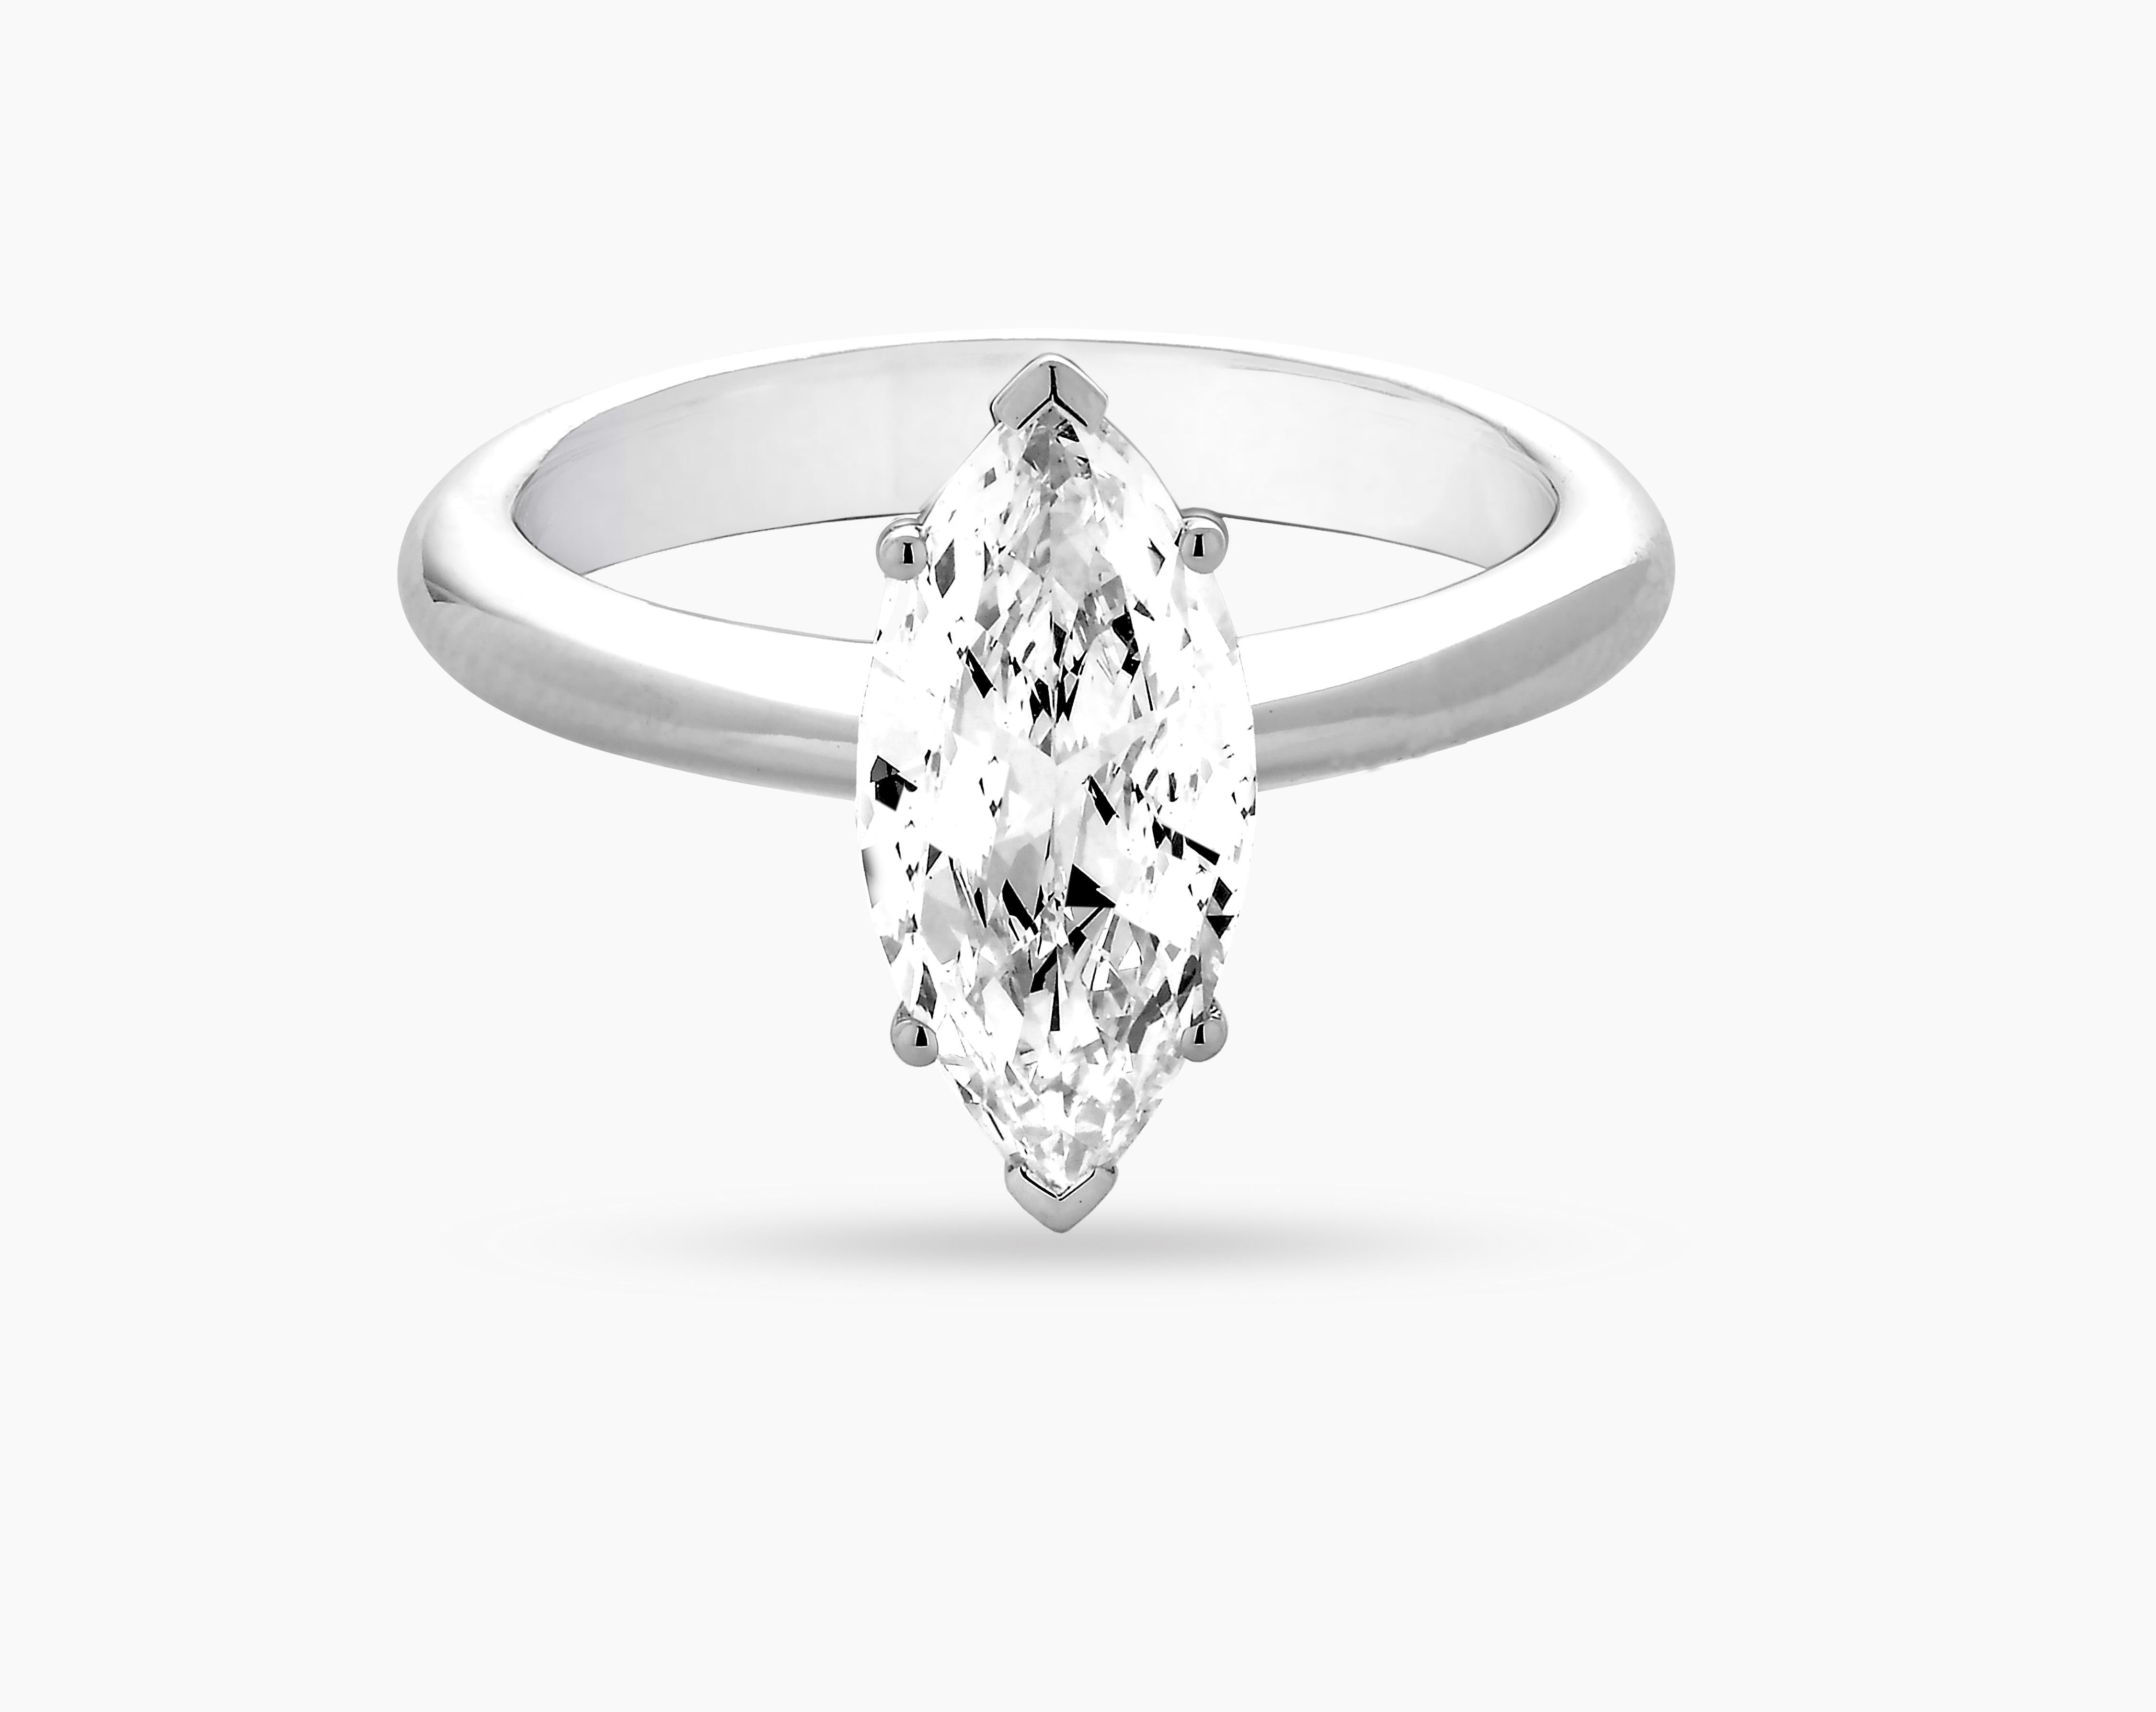 IGI (International Gemological Institute, Antwerp) certified VVS2 diamond 1.62 carat engagement ring. Marquise cut solitaire engagement ring in 18k white gold with E colour VVS2 clarity center stone from CARON Fine Jewellery.

Elegance is combined